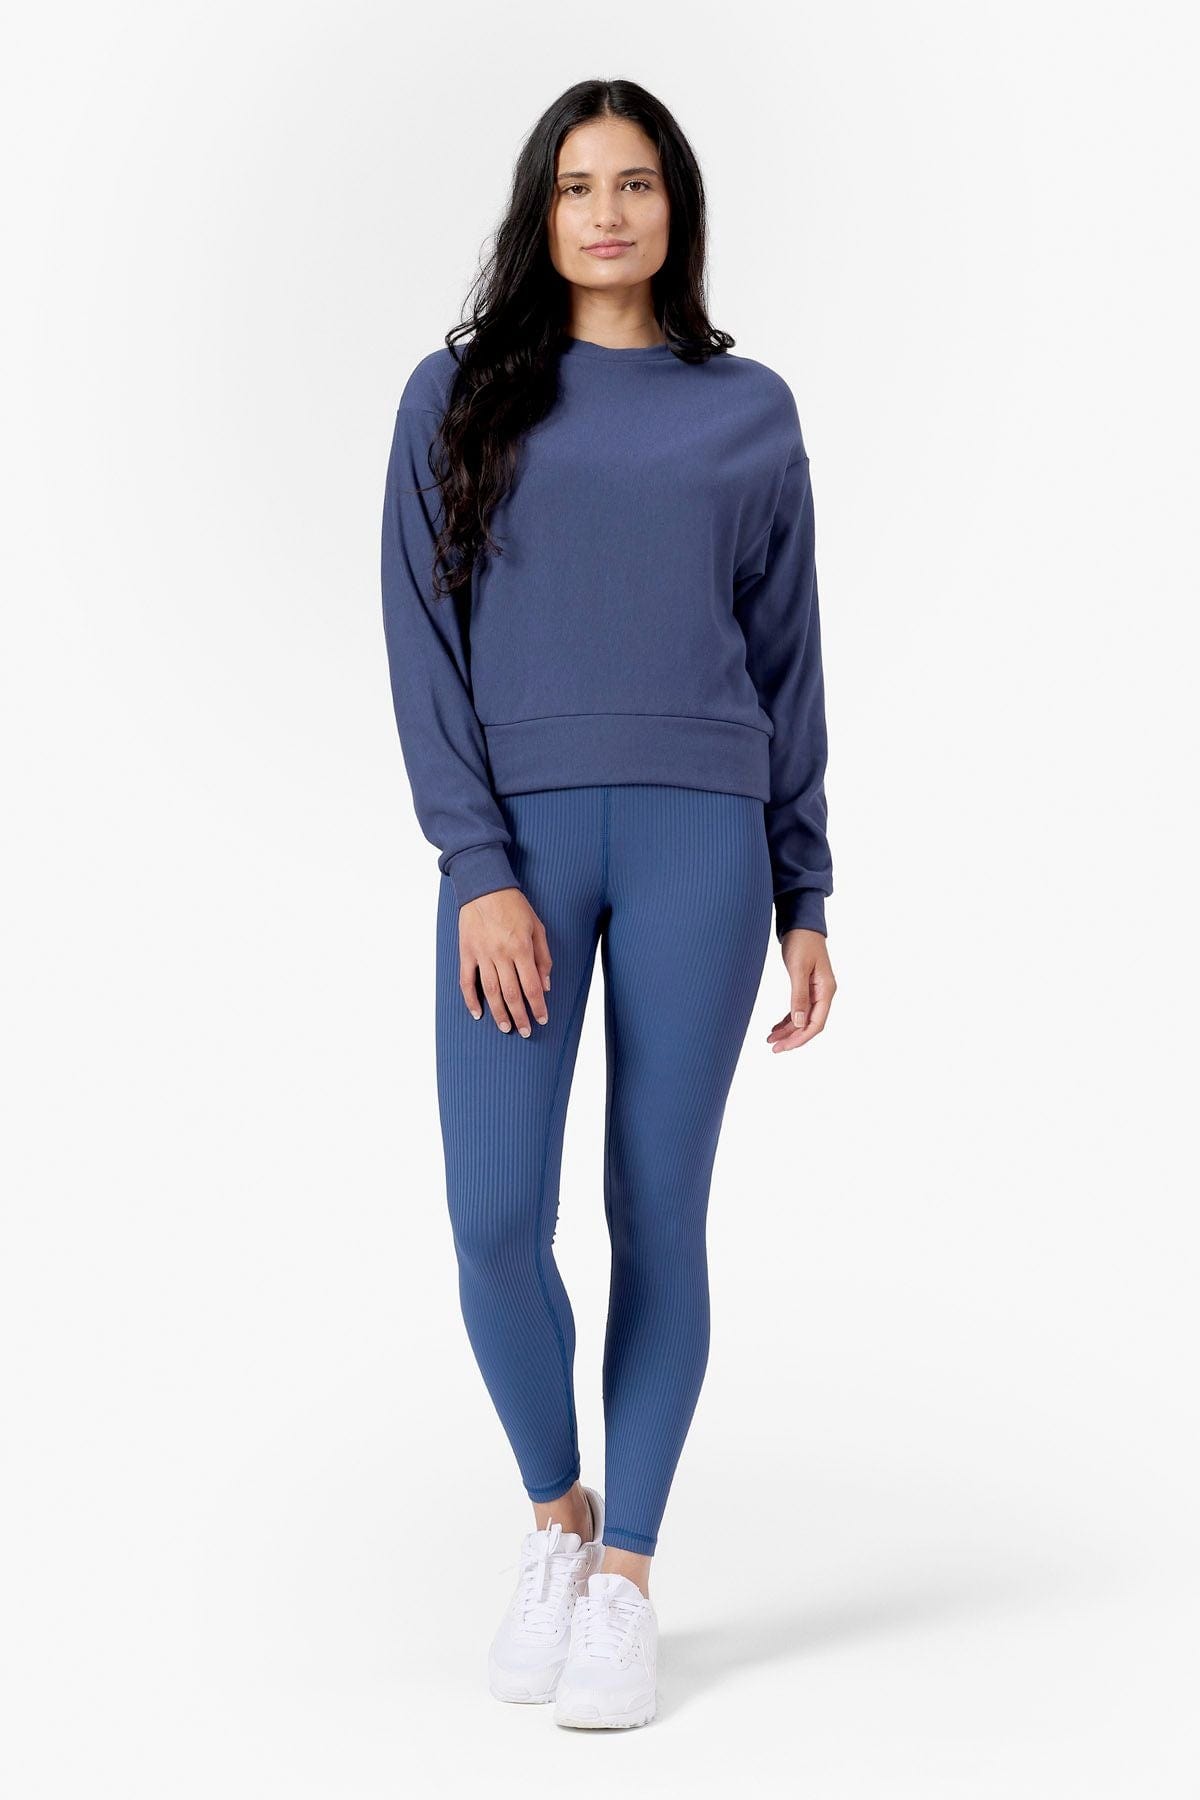 a woman wearing ribbed blue leggings and blue sweater